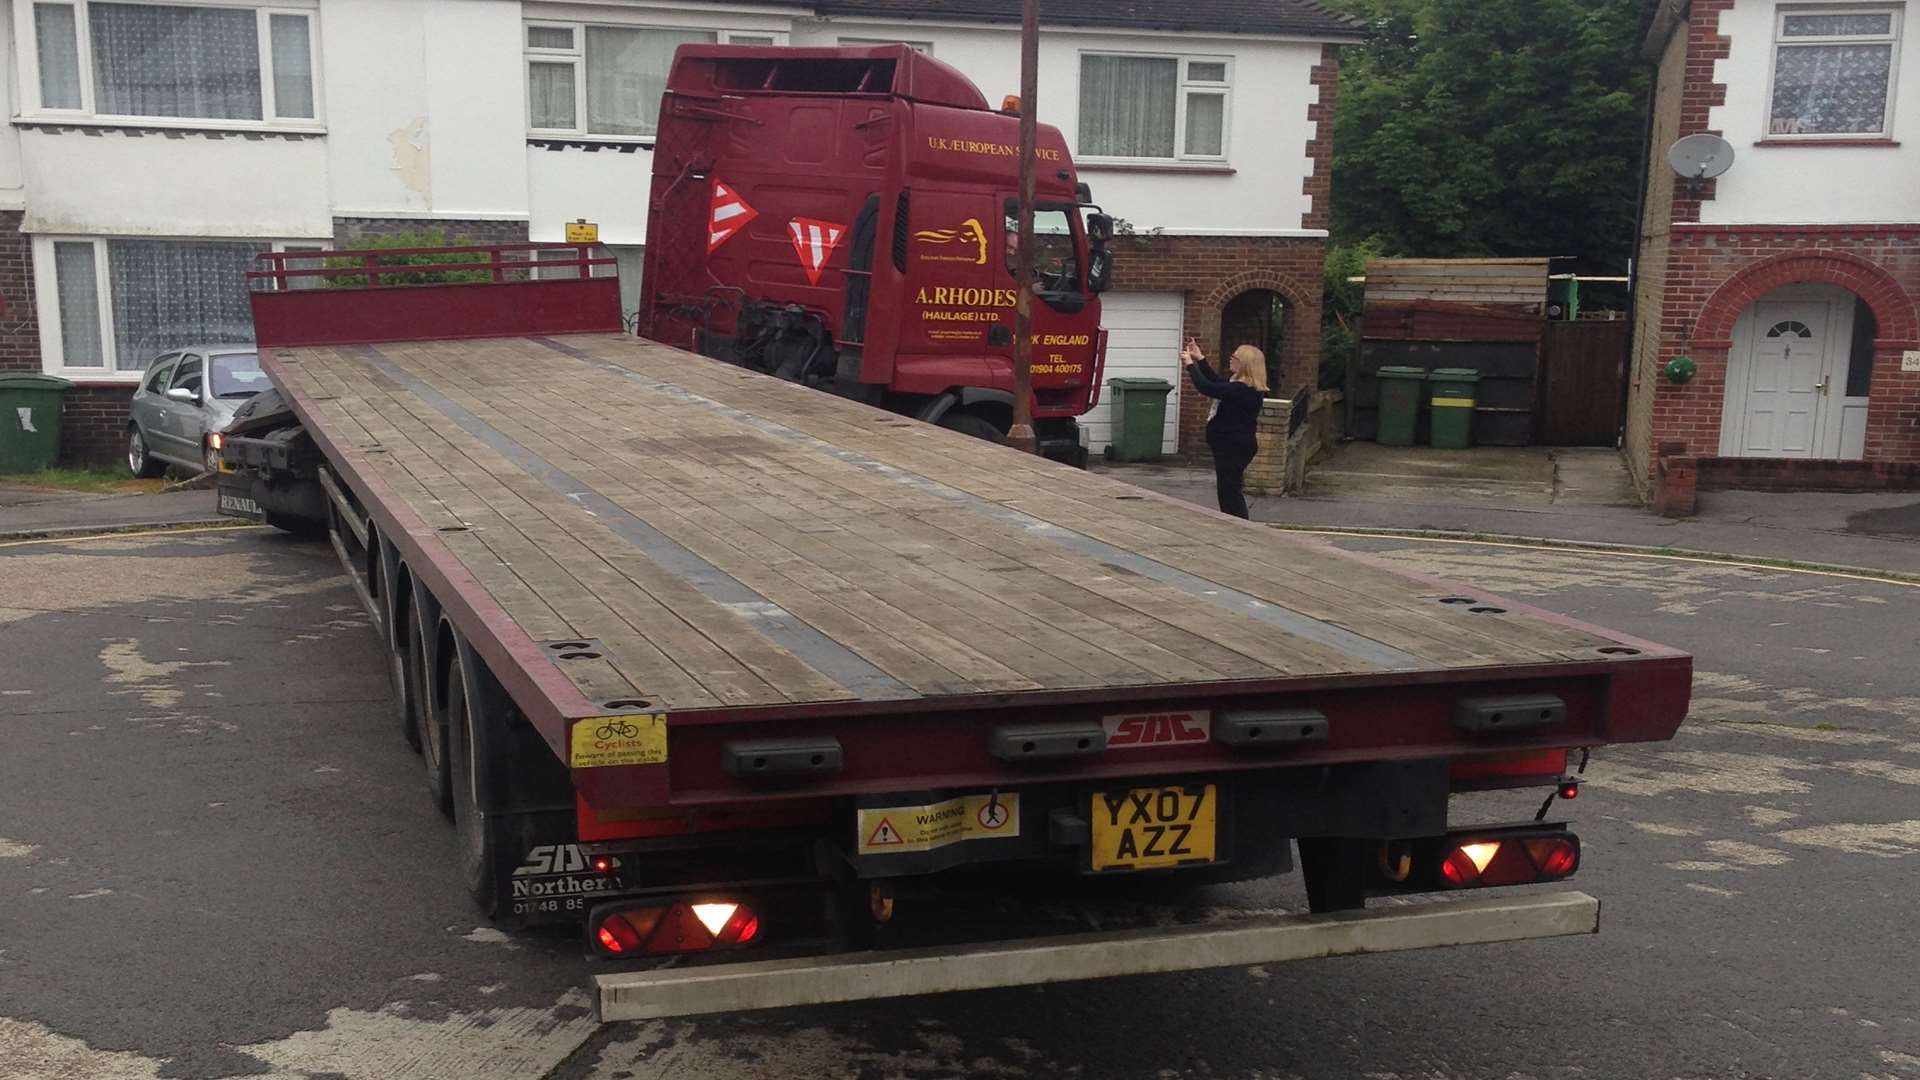 The flatbed truck lodged in the turning circle